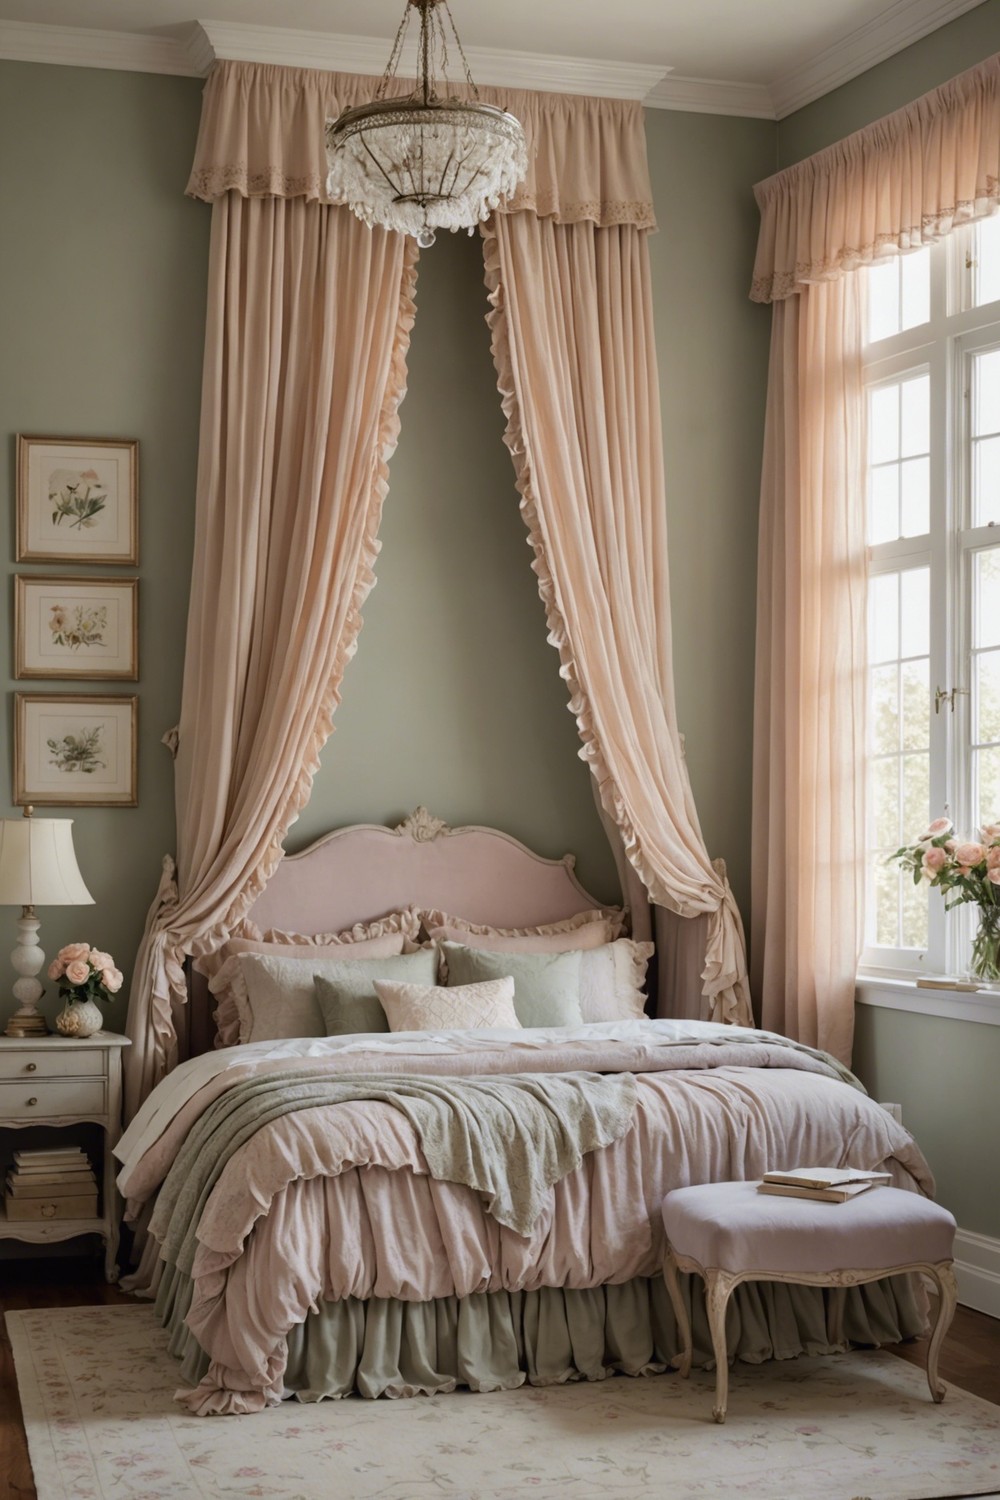 Soft Focus: Pastel Shades and Whimsical Textiles